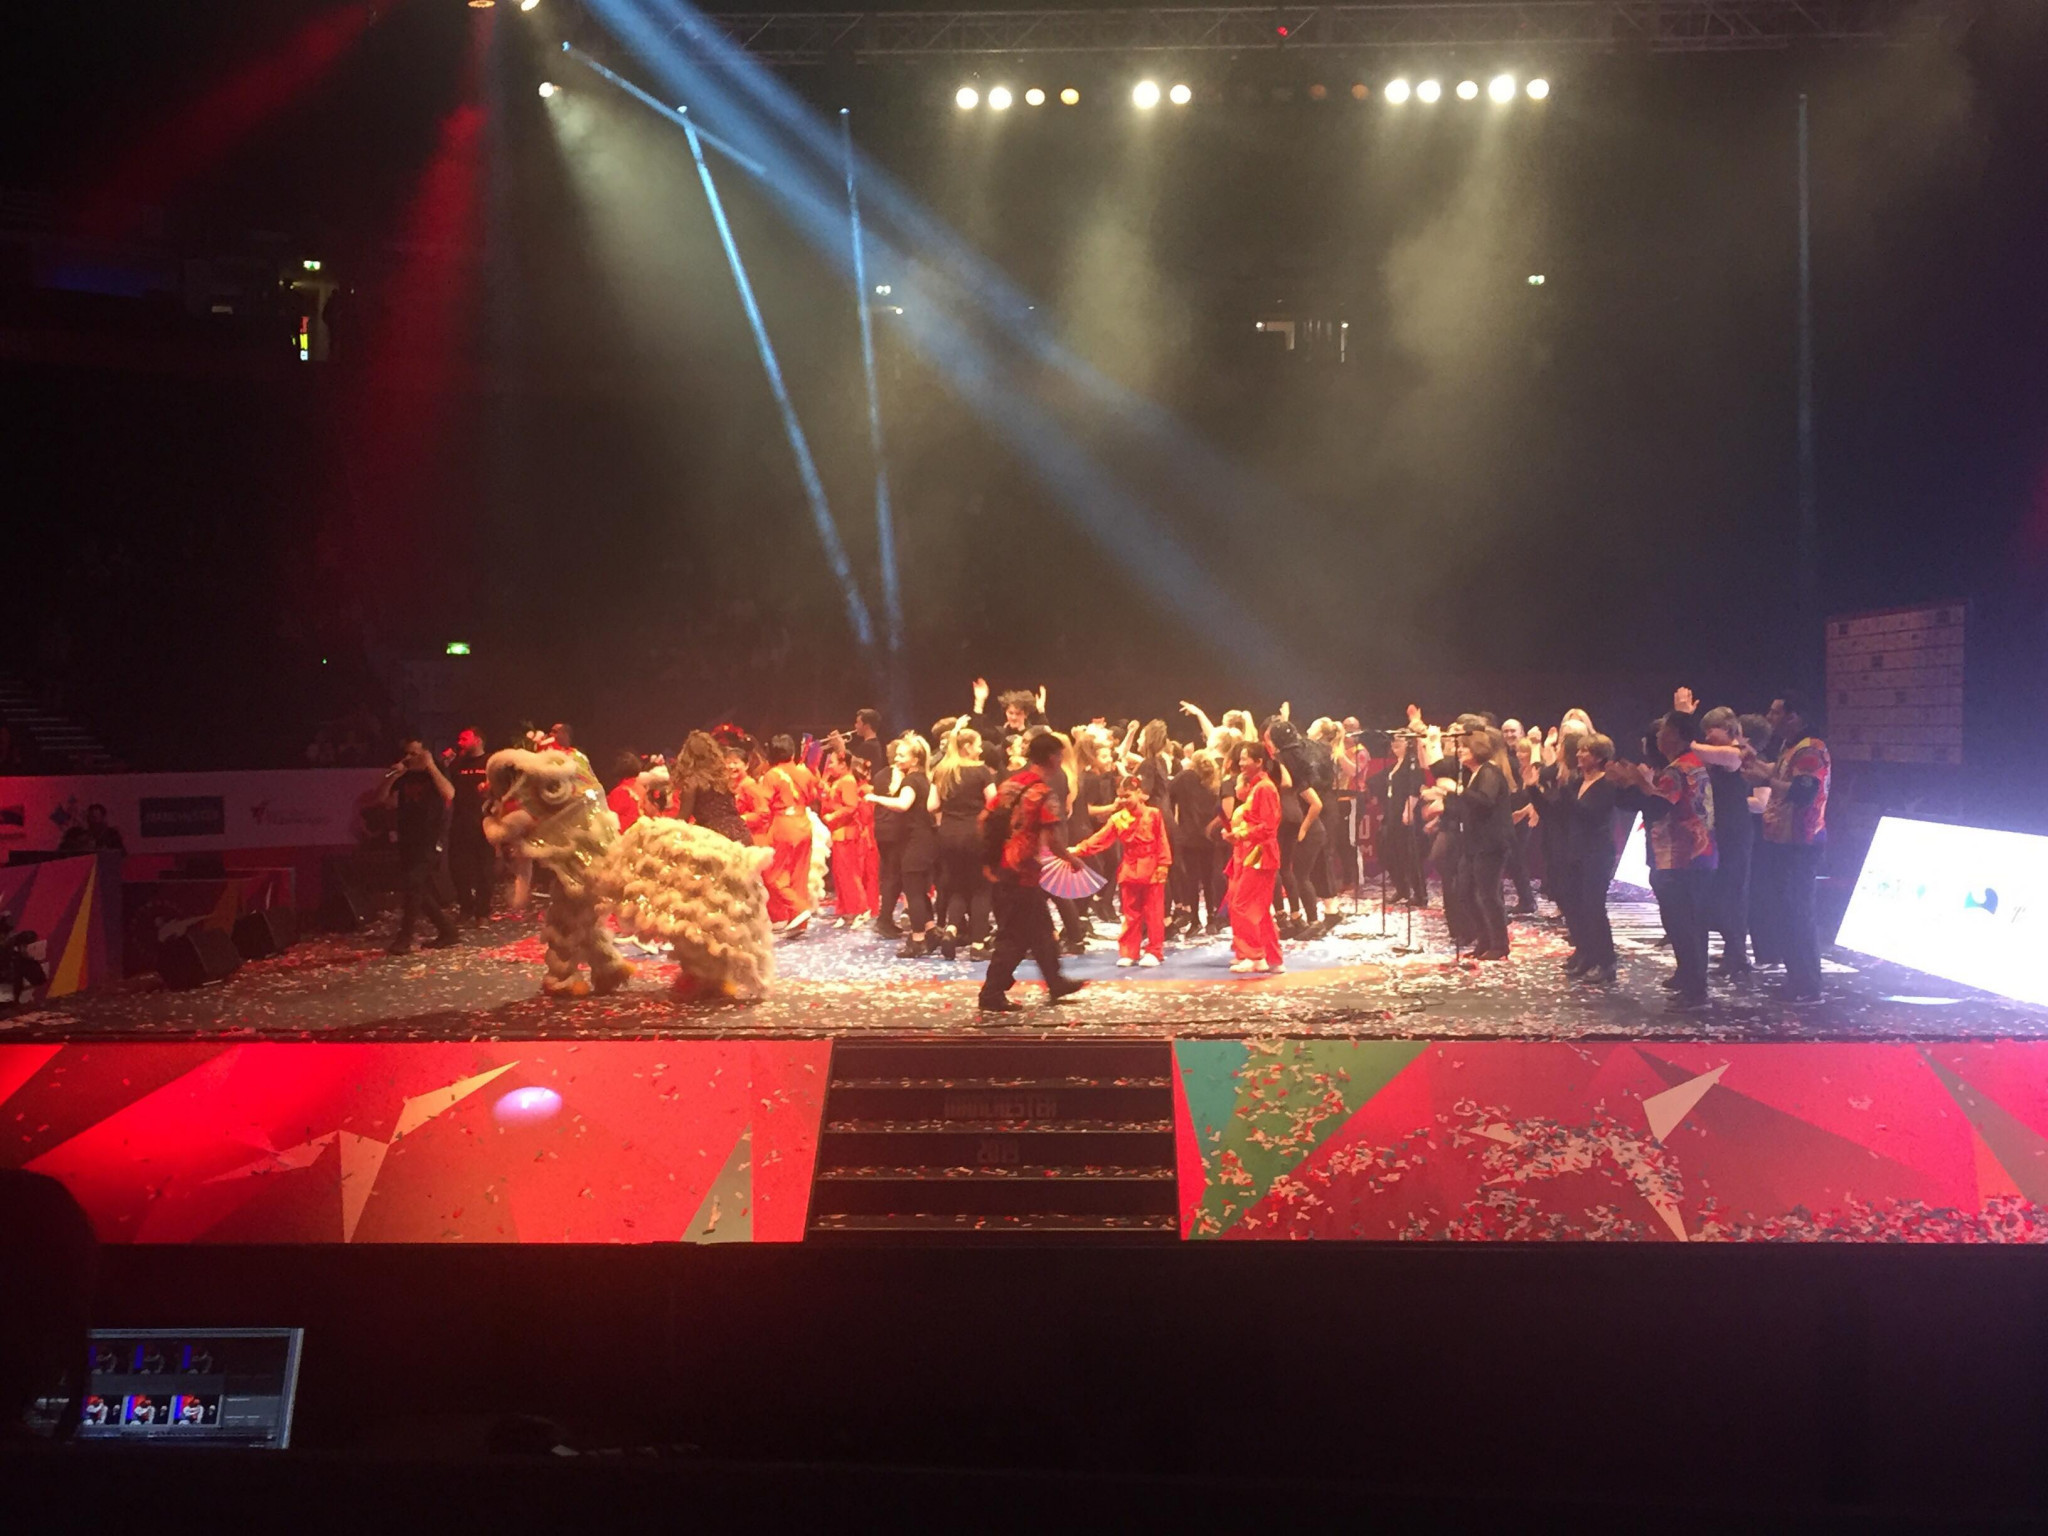 Closing Ceremony marks the end of the World Taekwondo Championships in Manchester